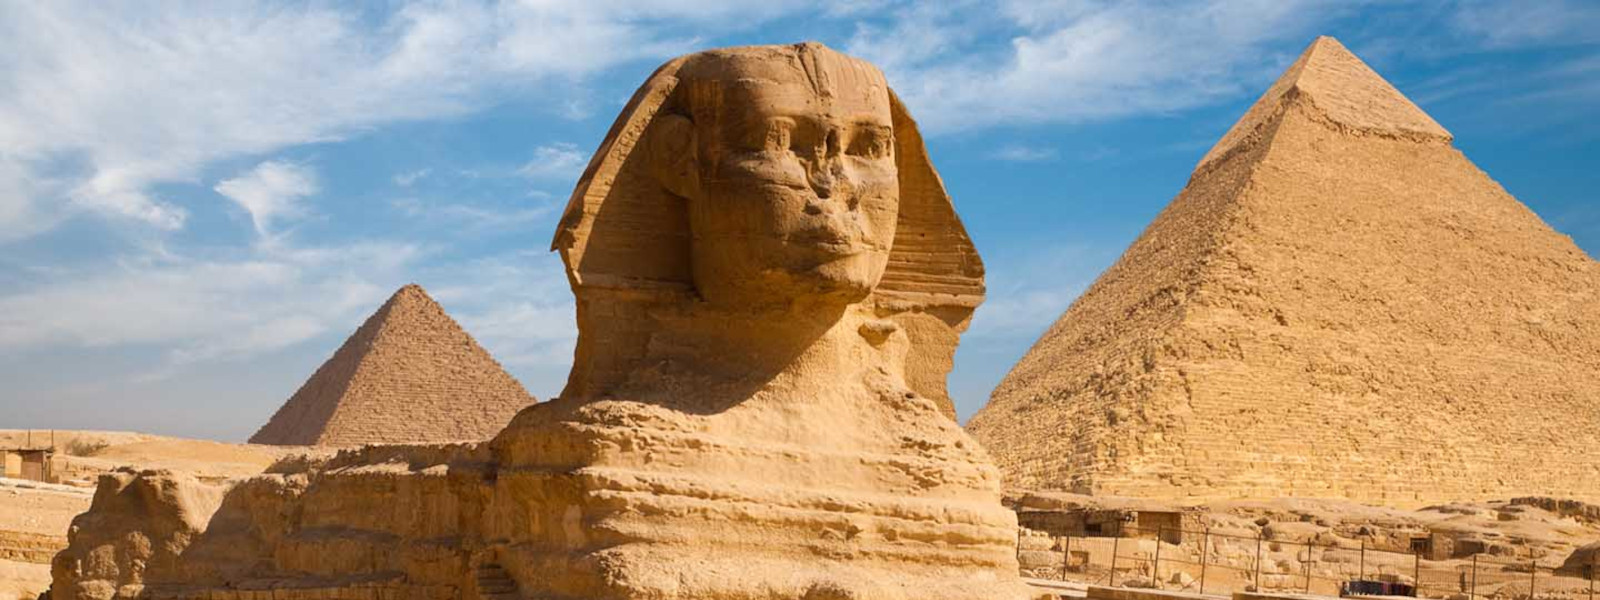 How to see Egypt in one week